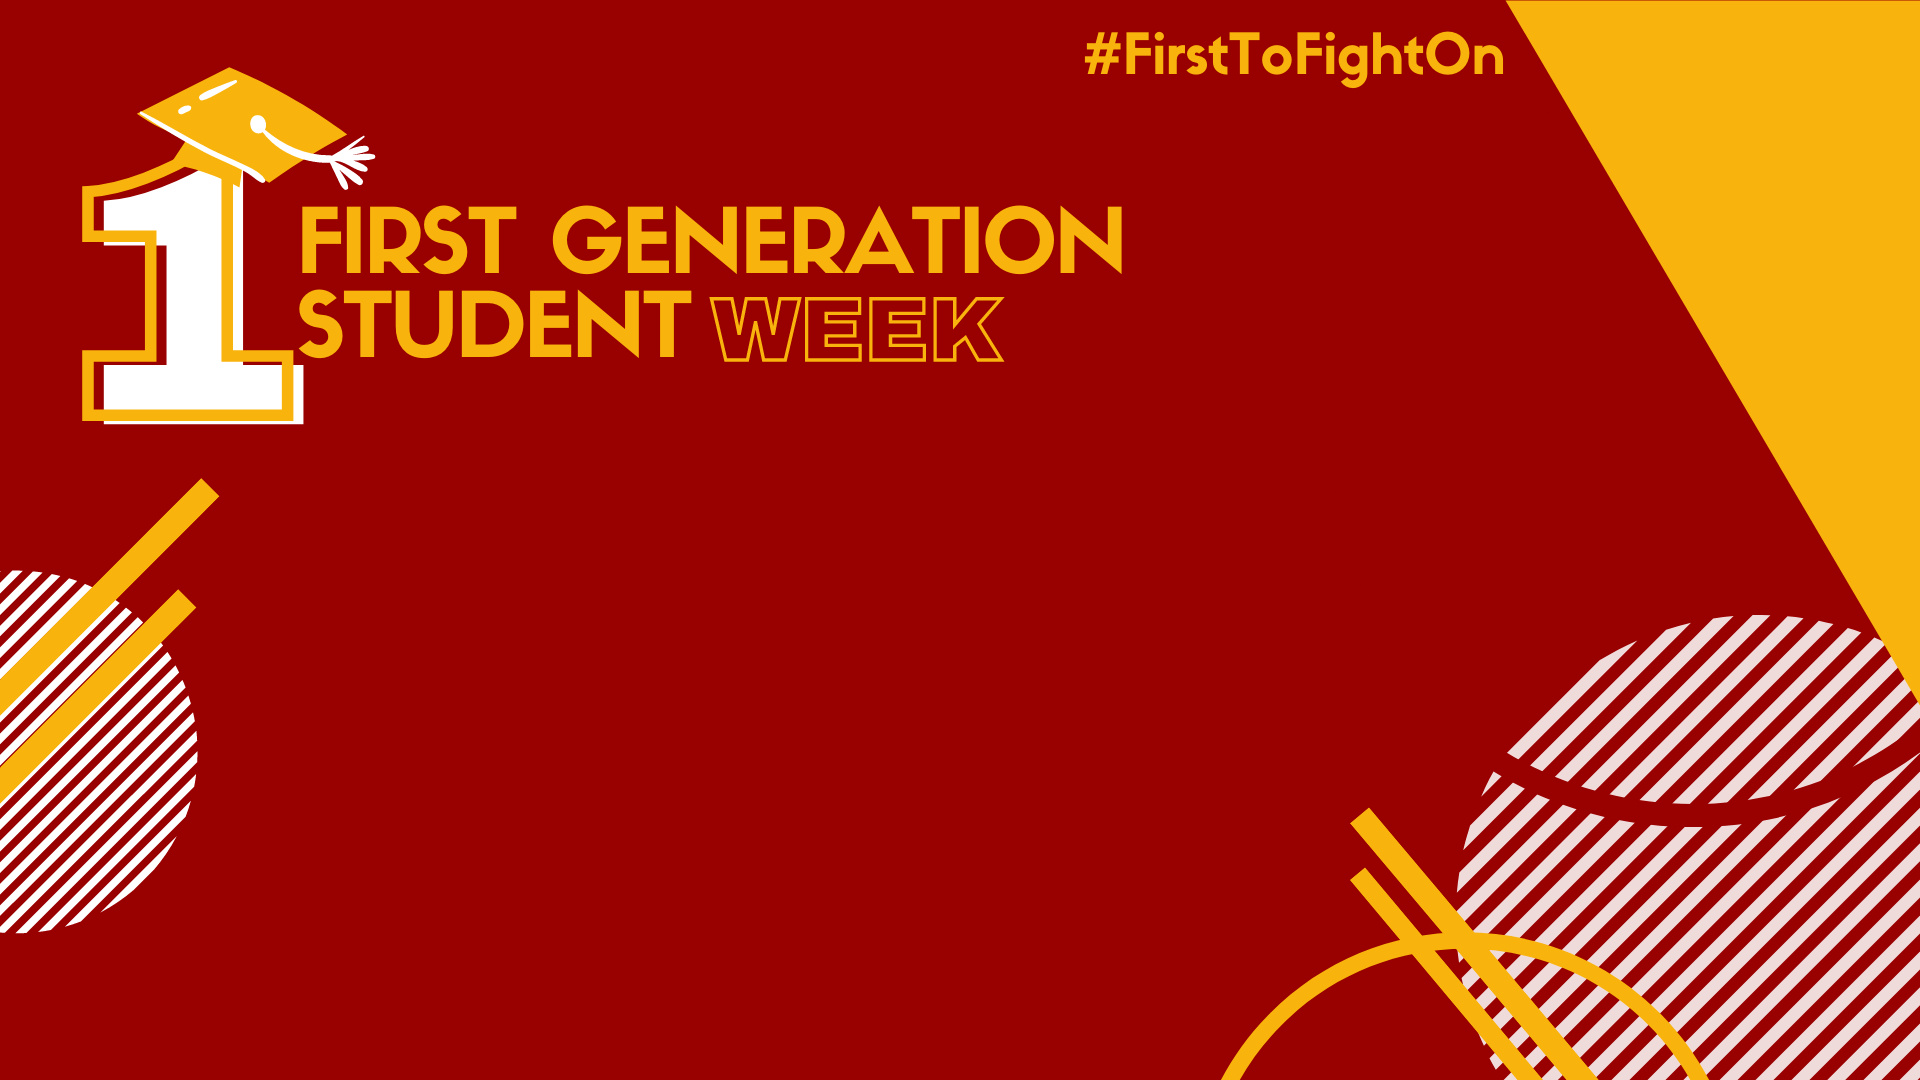 #FirsttoFightOn: First Generation Student Week at USC!